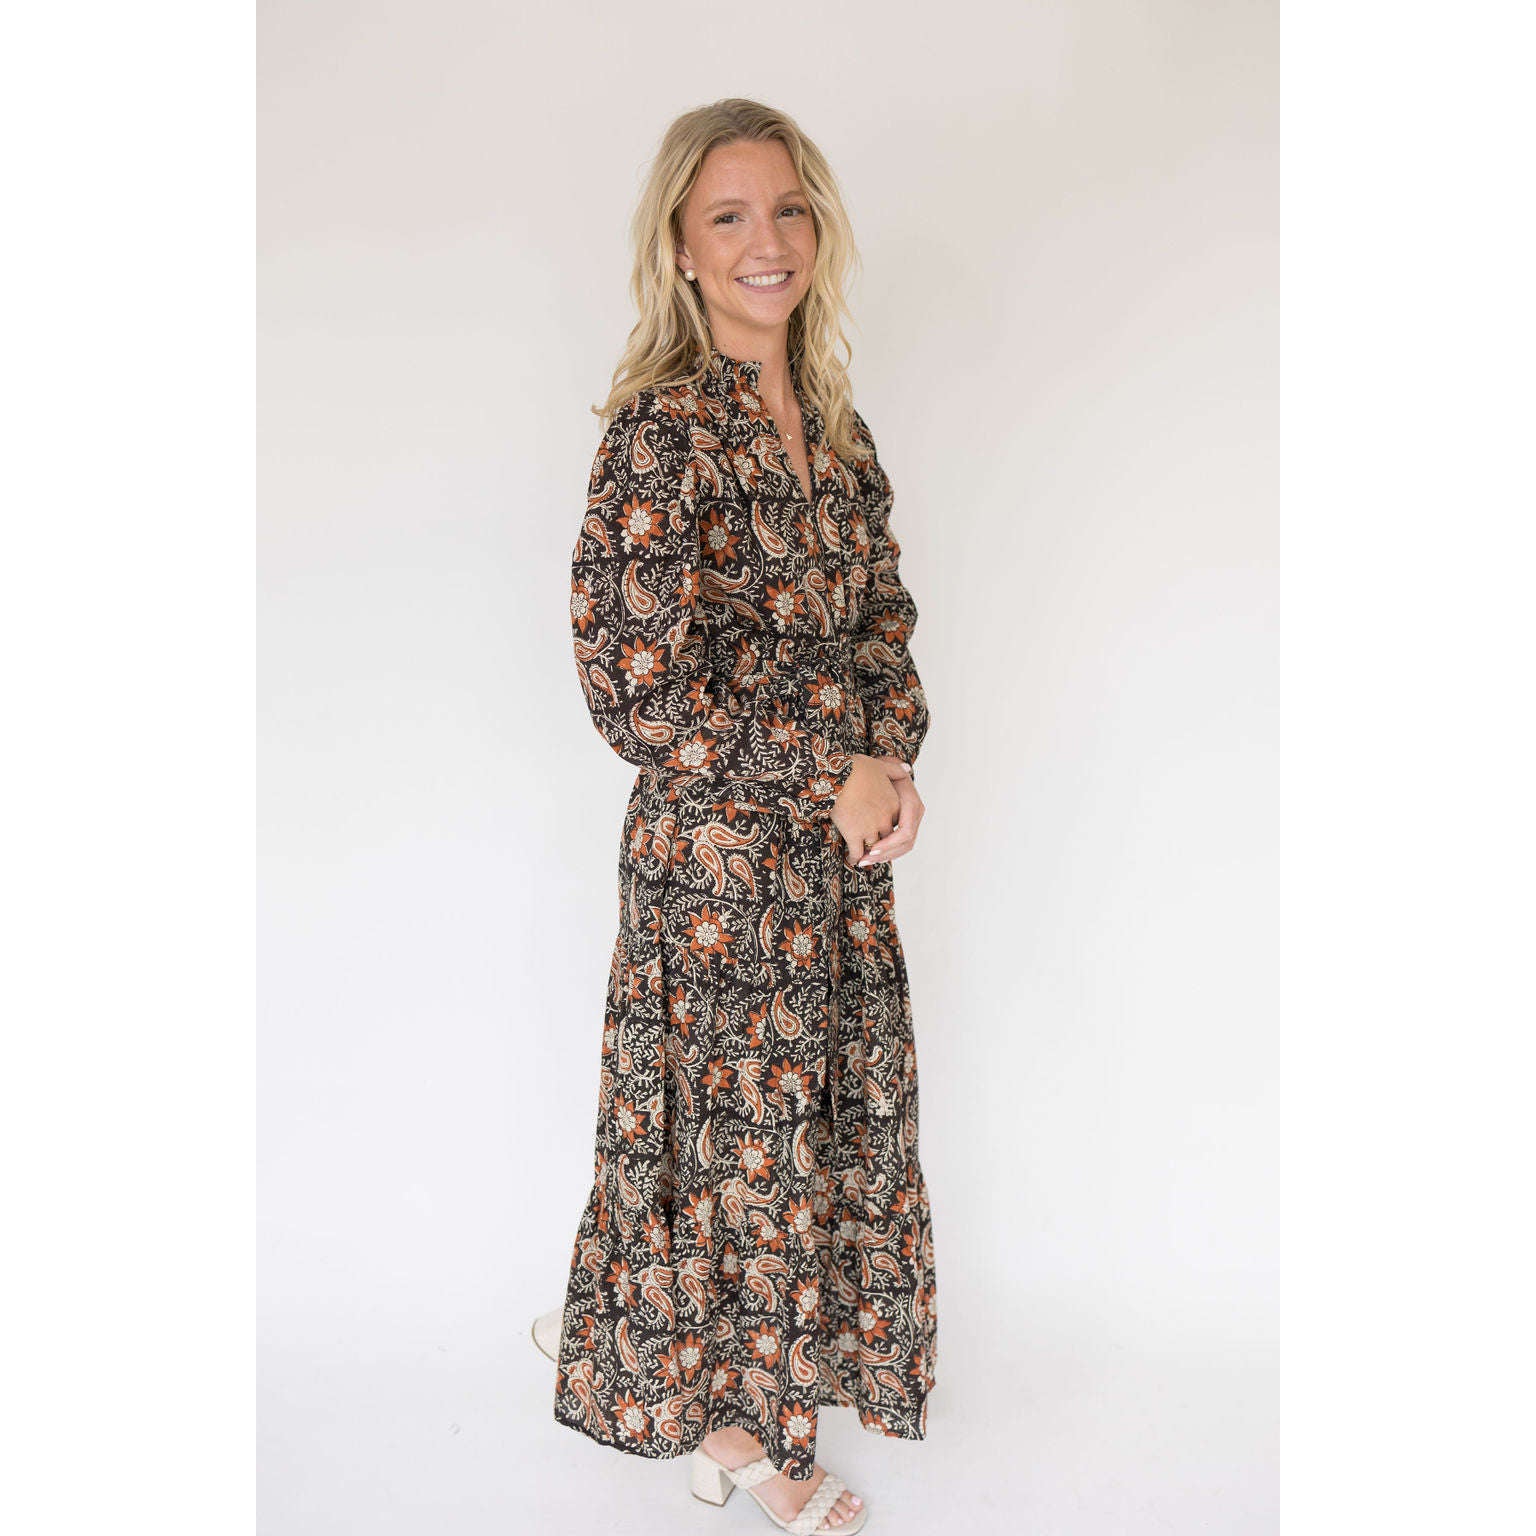 8.28 Boutique:Anna Cate Collection,Anna Cate Collection Elizabeth Paisley Dress,Dress